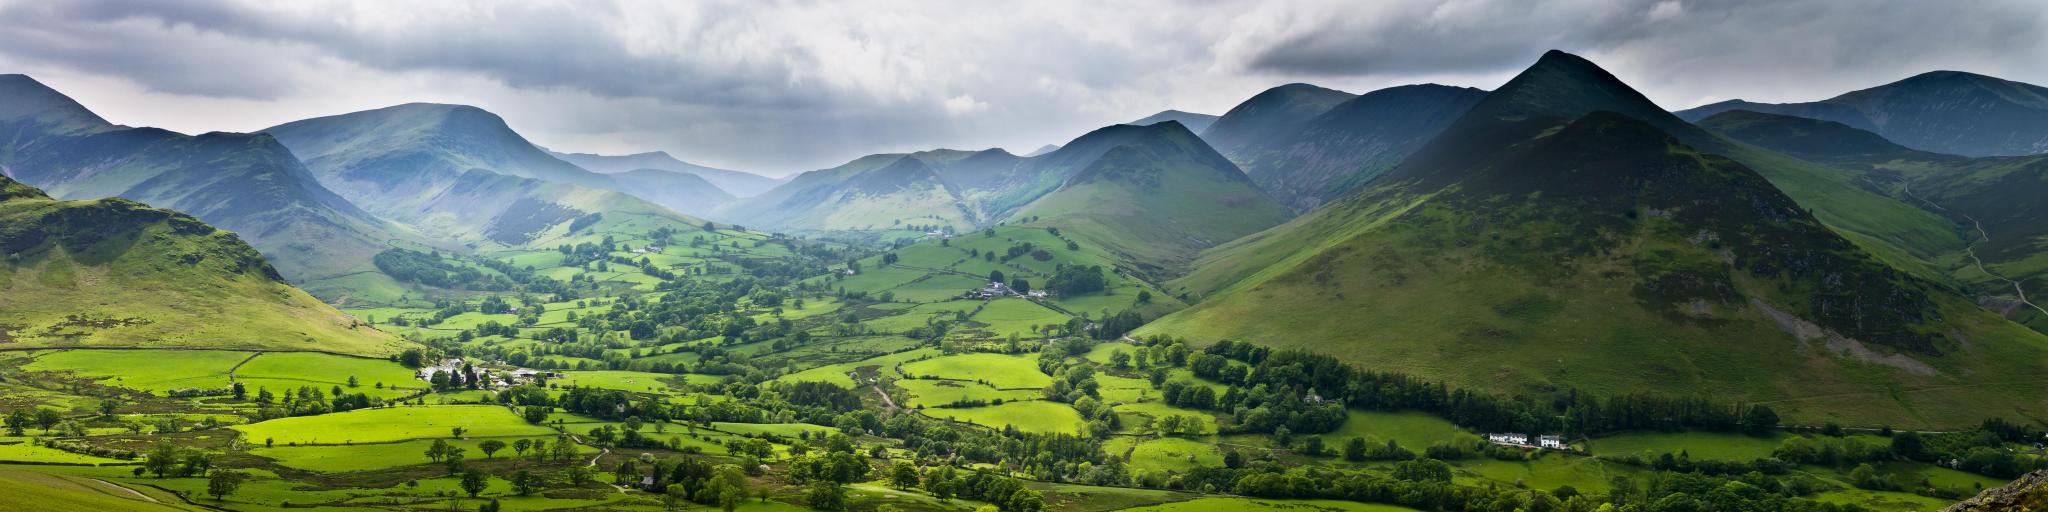 Lake District, England with a panoramic image of the Newlands valley from the sumit of Cat Bells in the English Lake District.